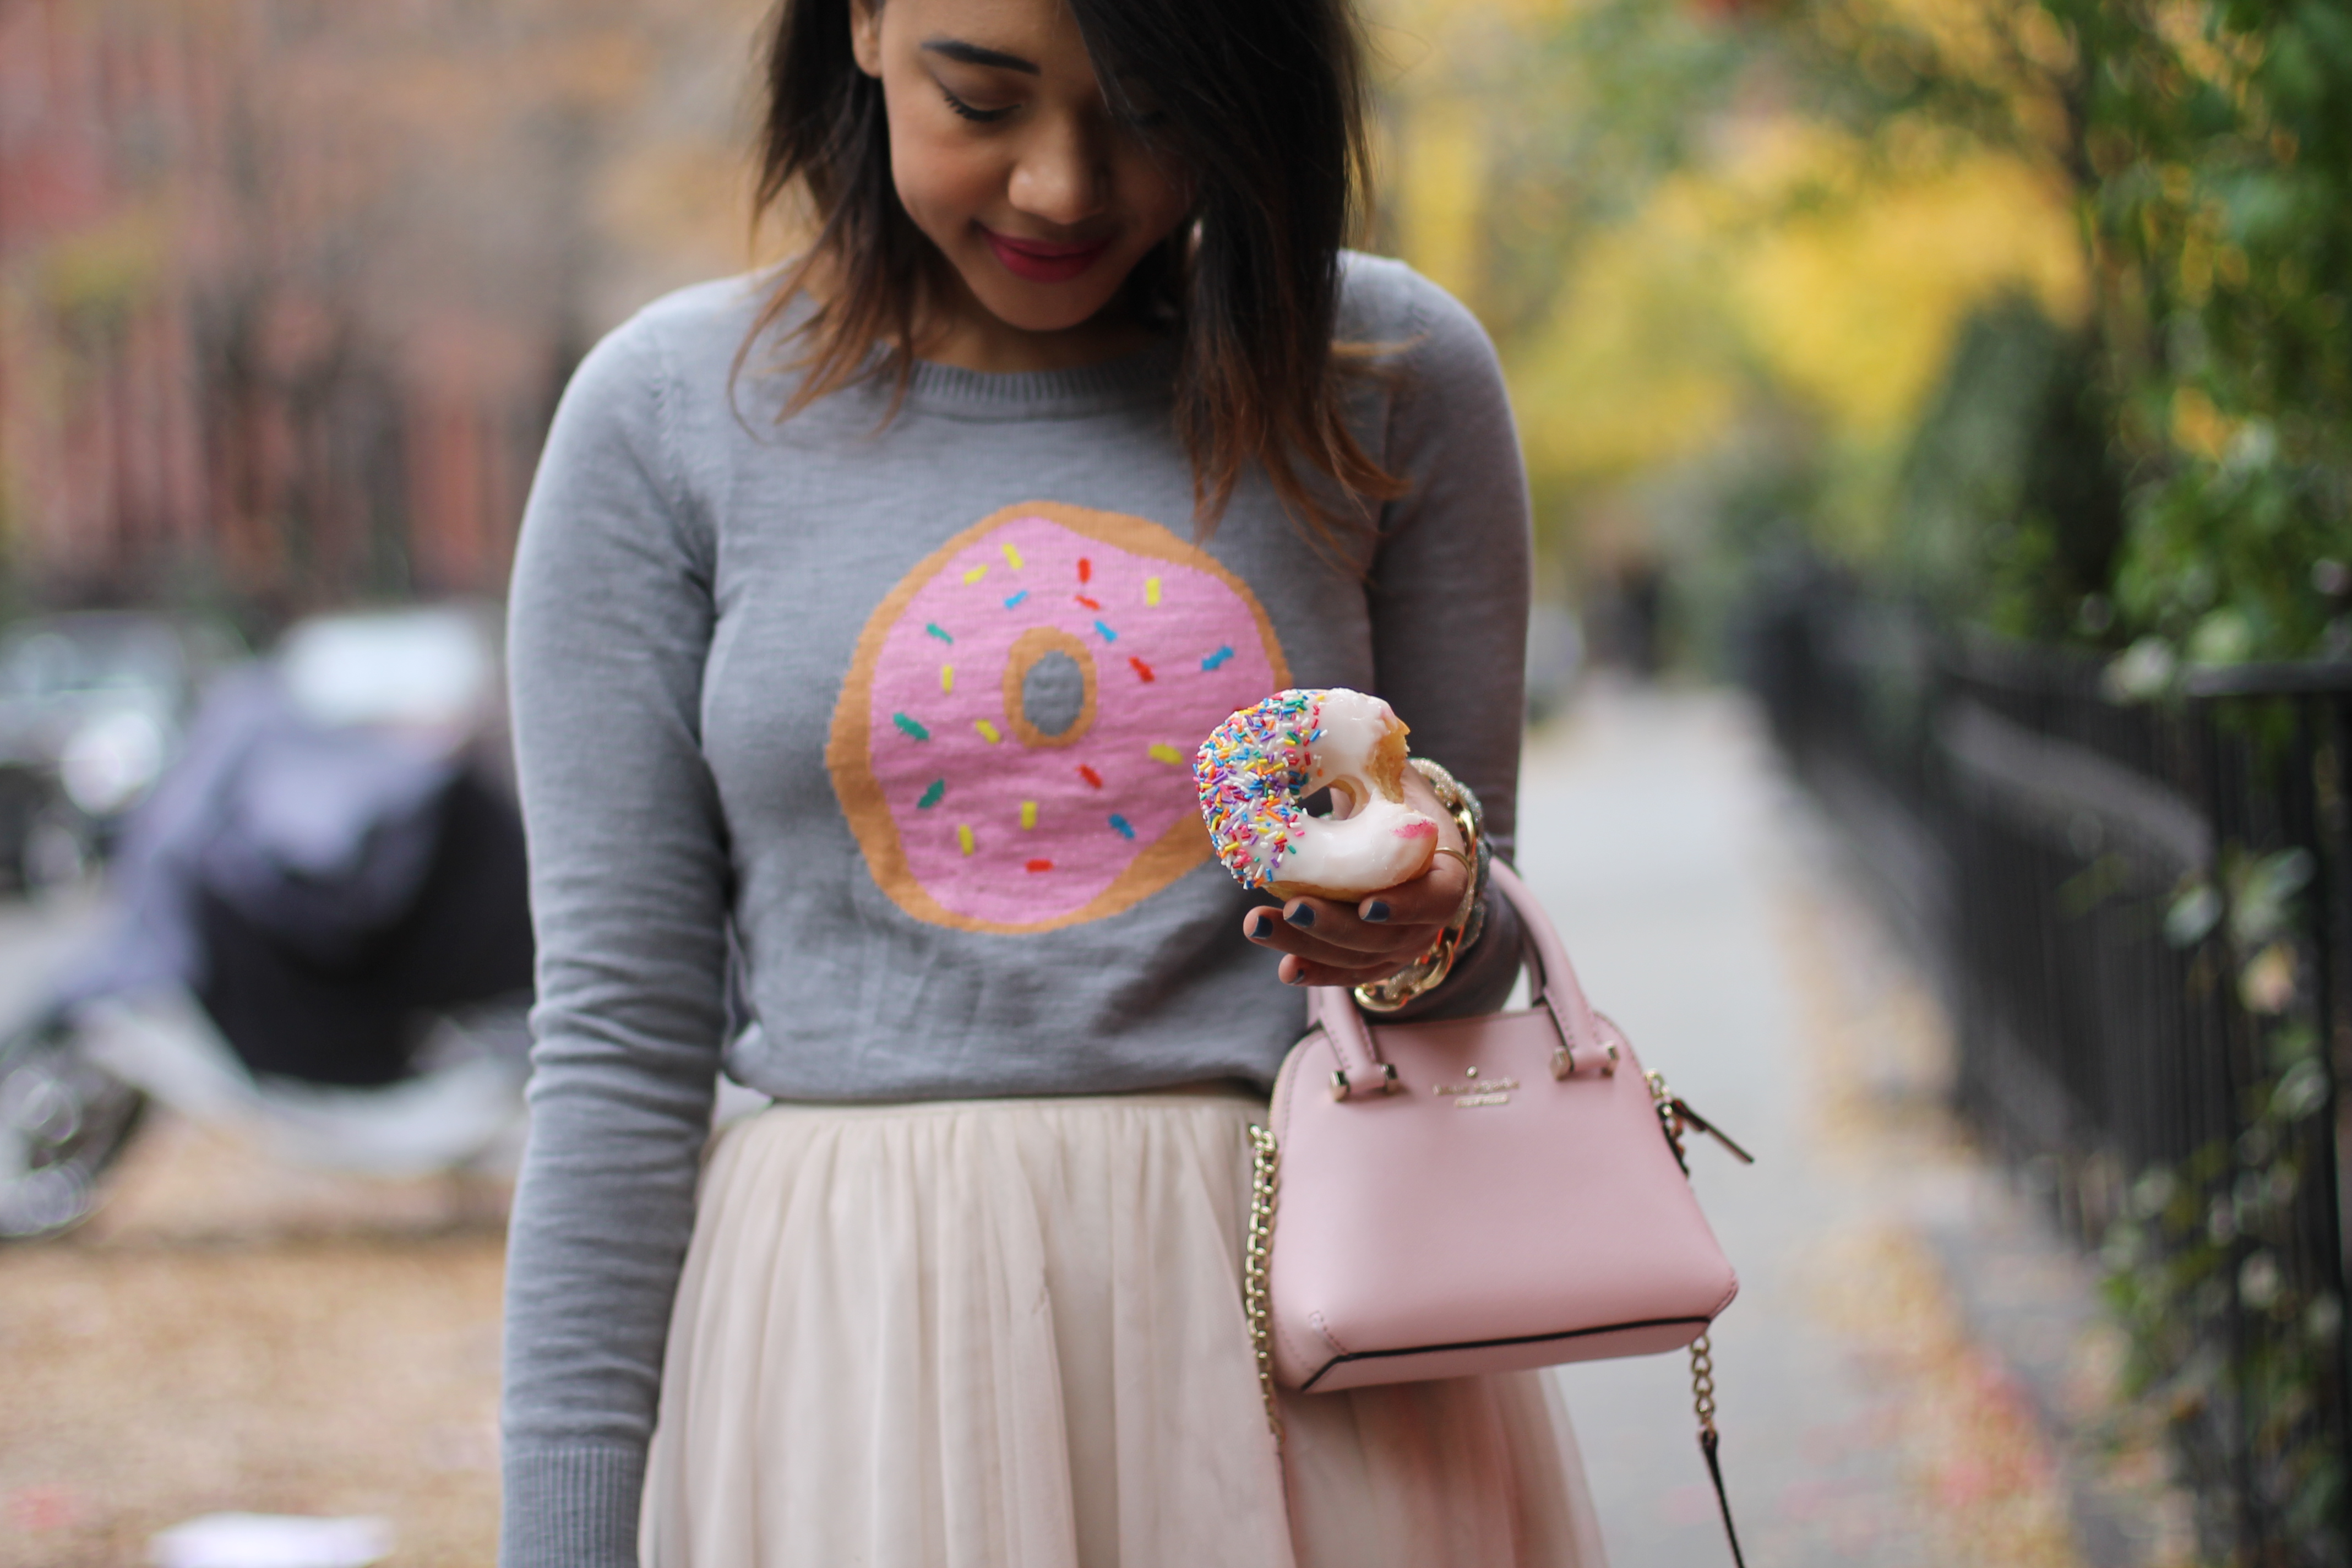 donut sweater how to wear a donut sweater donut sweatshirt donut sweater target donut sweater doughnut sweater doughnut sweater doughnut sweater donut sweater color me courtney donut obsessed